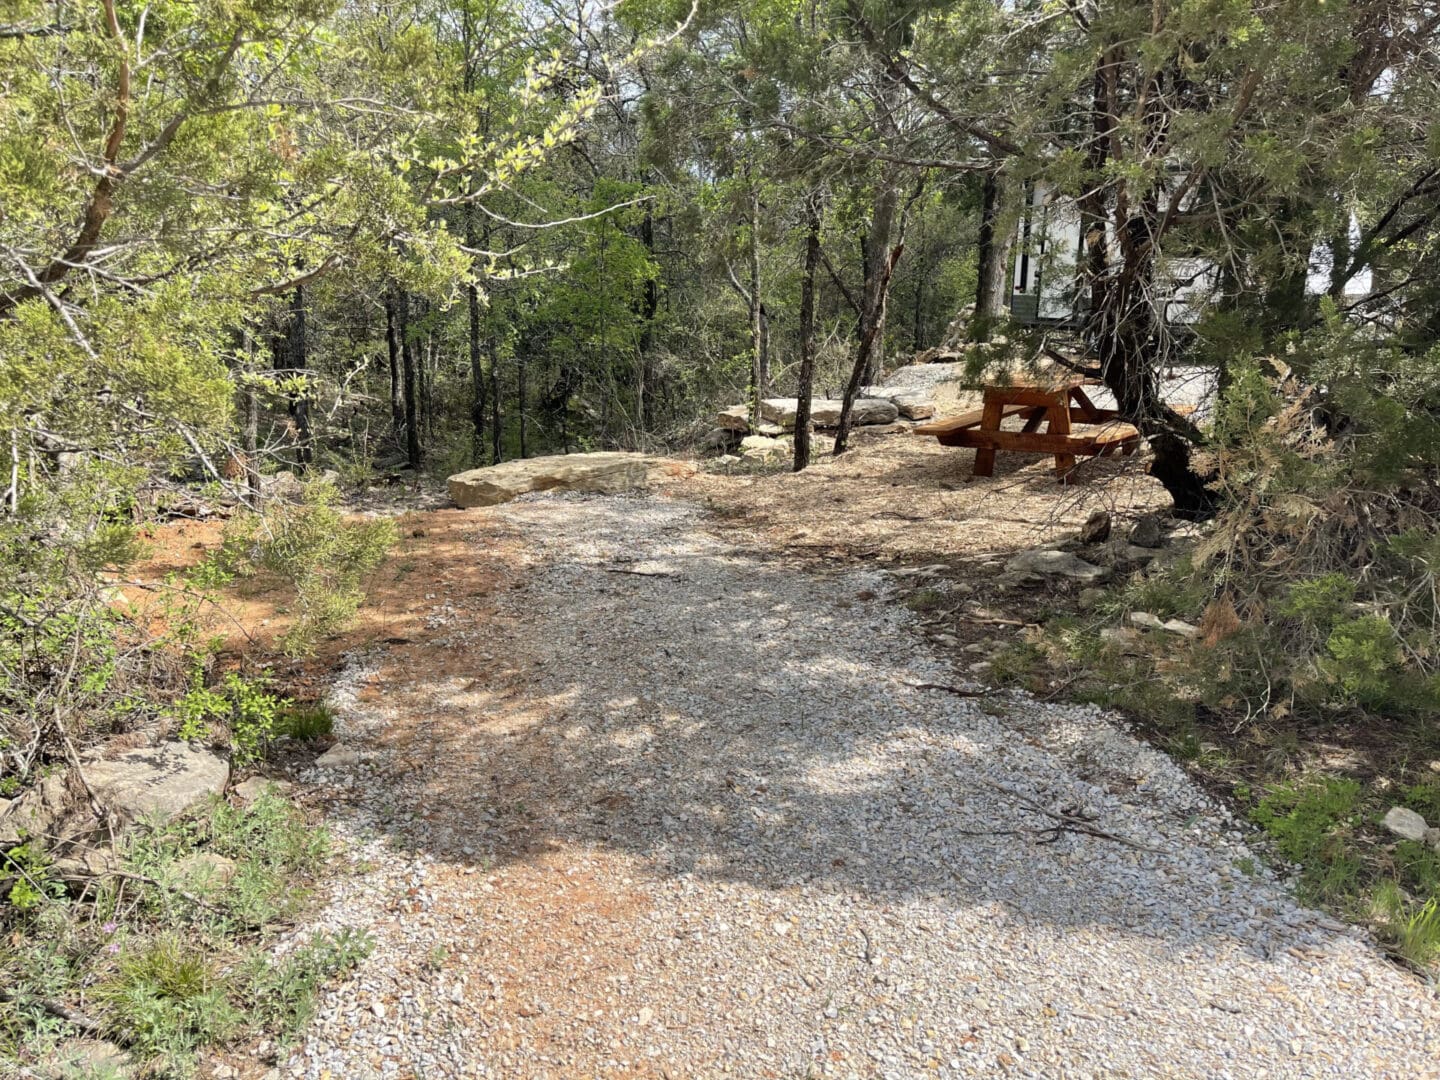 A trail with trees and rocks in the background.